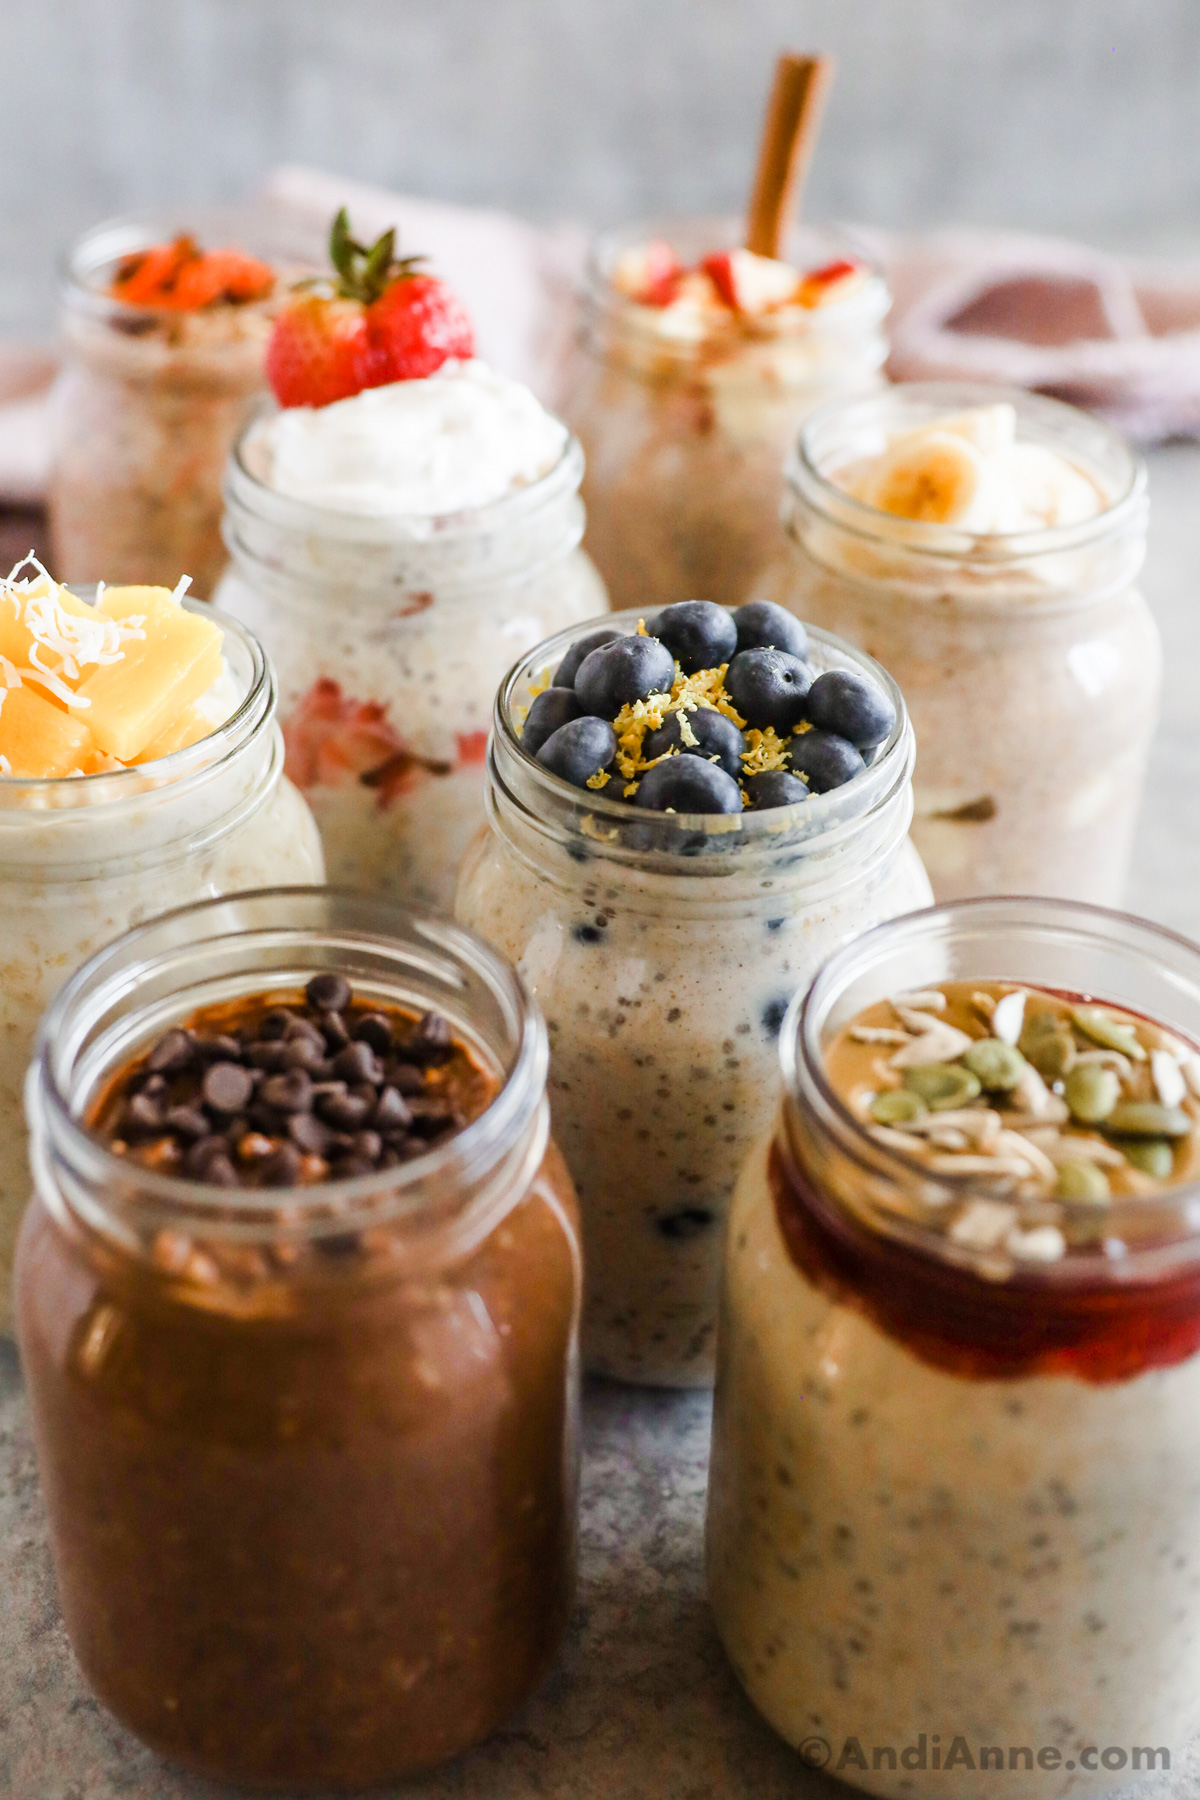 8 different overnight oats flavors in mason jars, all with various toppings including chocolate chips, blueberries, seeds and other fruits. 